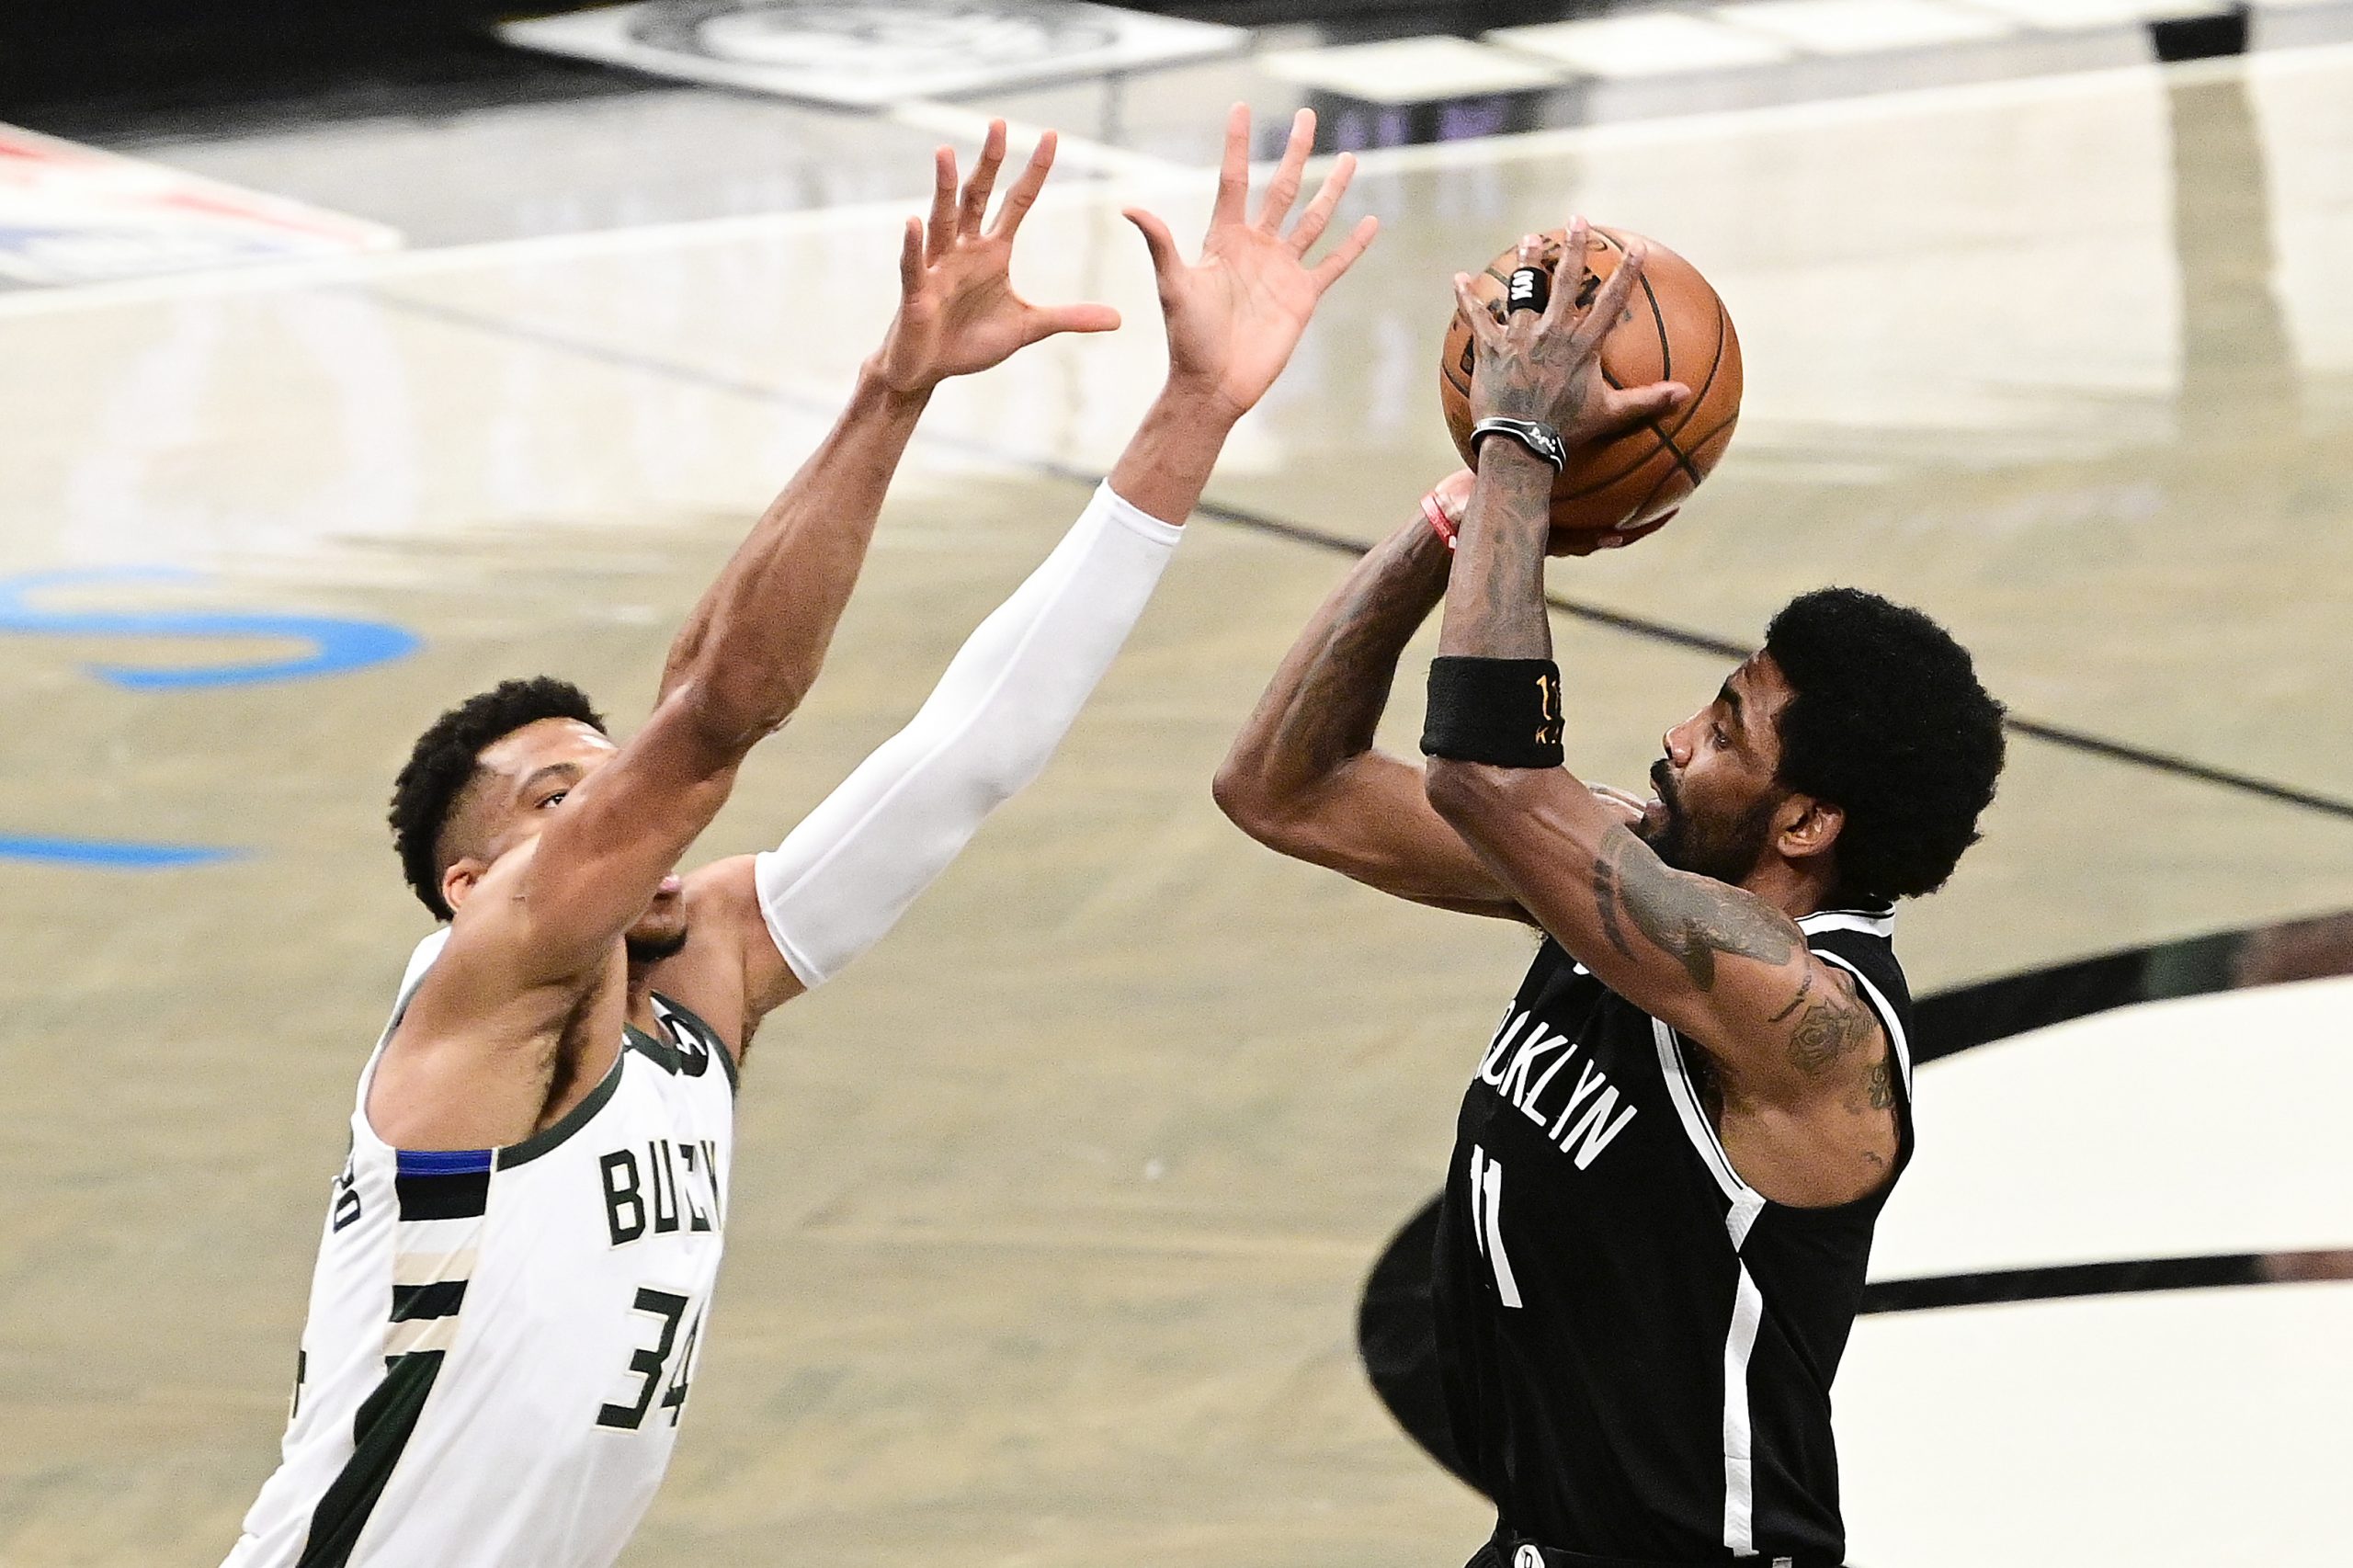 Kyrie Irving of the Brooklyn Nets attempts a shot against Giannis Antetokounmpo.